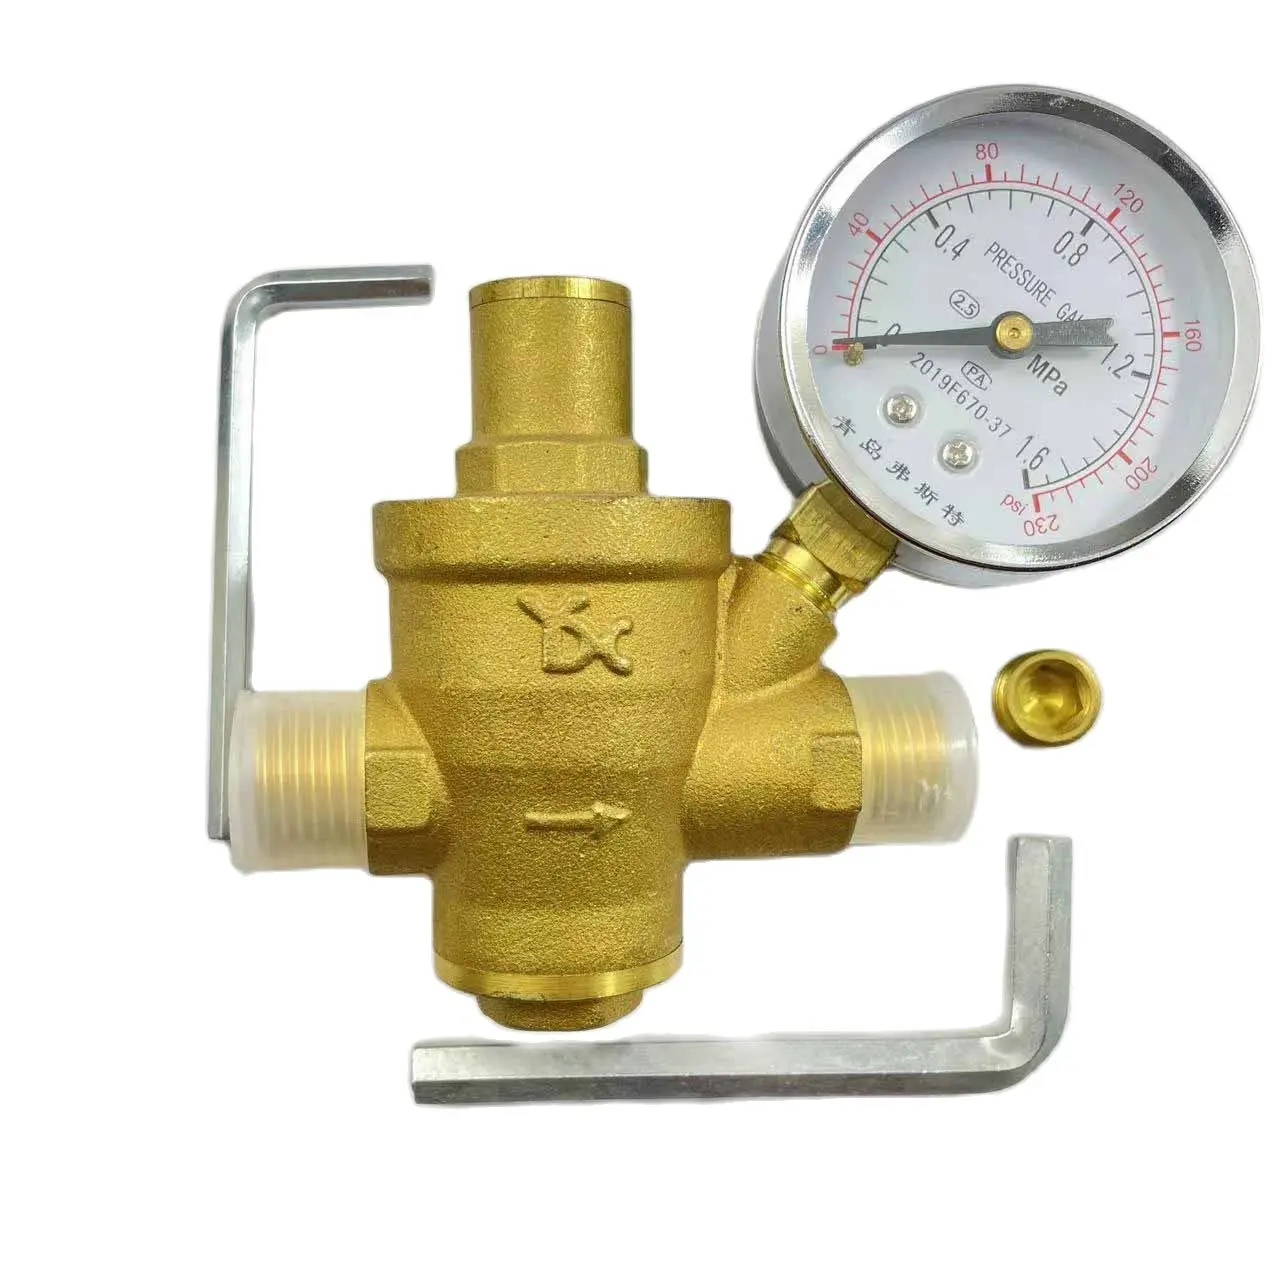 

G1/2" Male Thread High Temperature Adjustable Pressure Reducing Valve without Pressure Gauge made of Brass H59